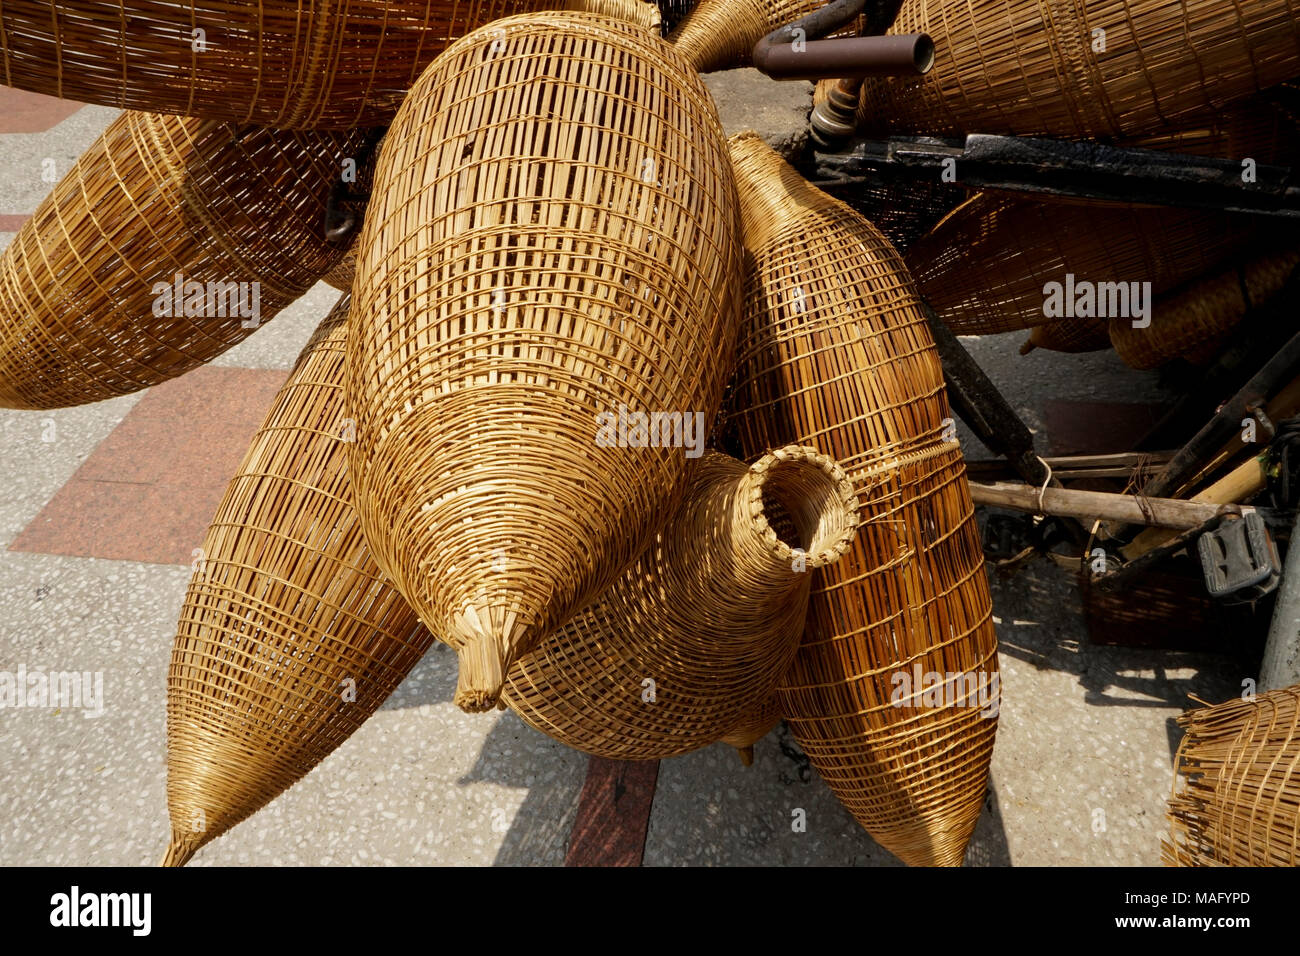 https://c8.alamy.com/comp/MAFYPD/bamboo-fish-traps-being-sold-in-vietnam-ho-chi-minh-city-used-for-shallow-water-fishing-MAFYPD.jpg